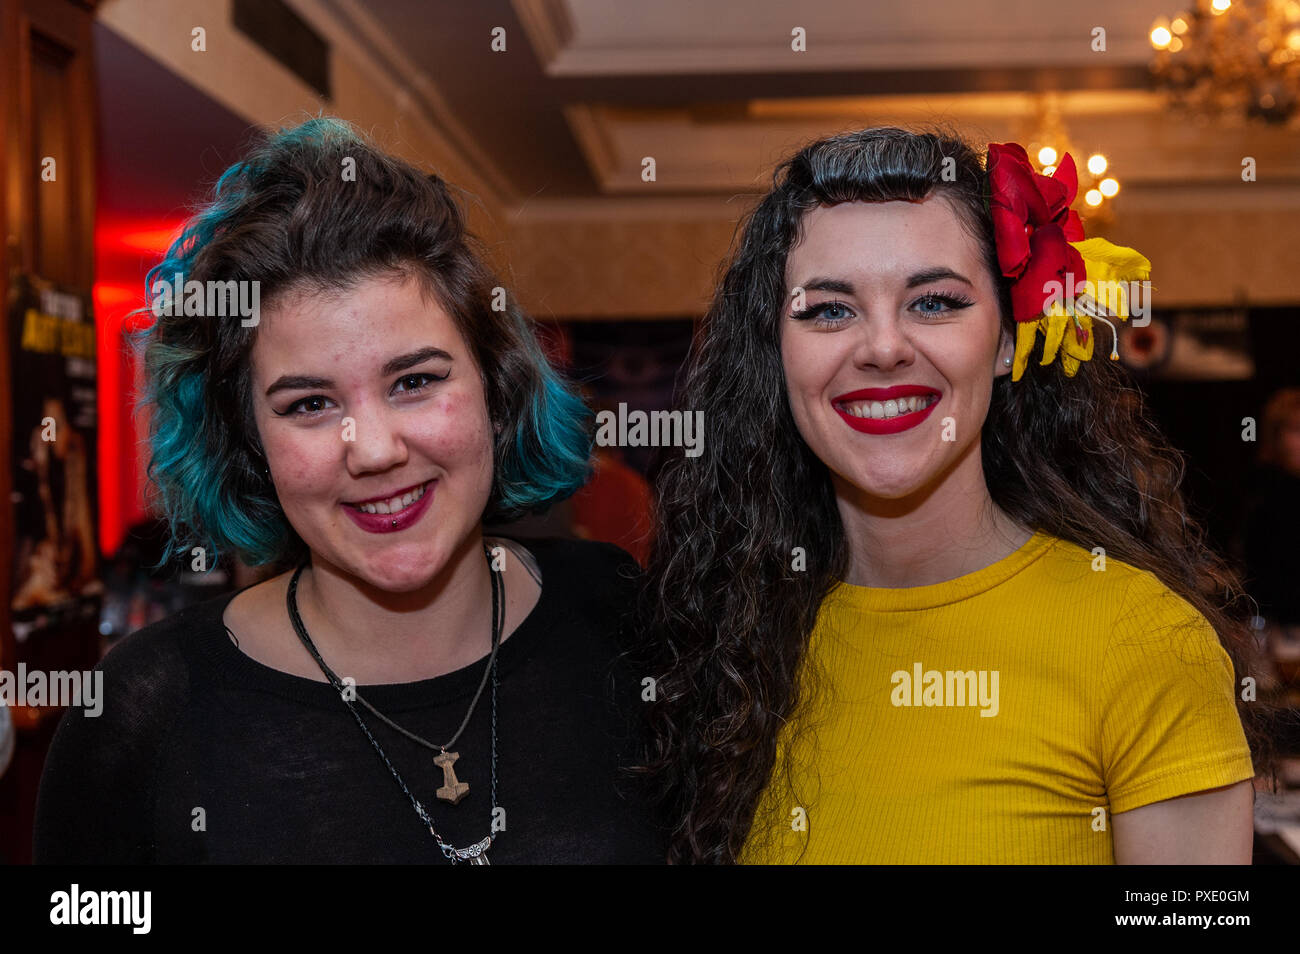 Skibbereen, West Cork, Ireland. 21st Oct, 2018. Pictured at the show are Mara Bergmeister, Killarney and 'Miss Lavelle', Limerick.  The show has been attended by many tattooists from across Ireland, the North and the UK. Credit: Andy Gibson/Alamy Live News. Stock Photo